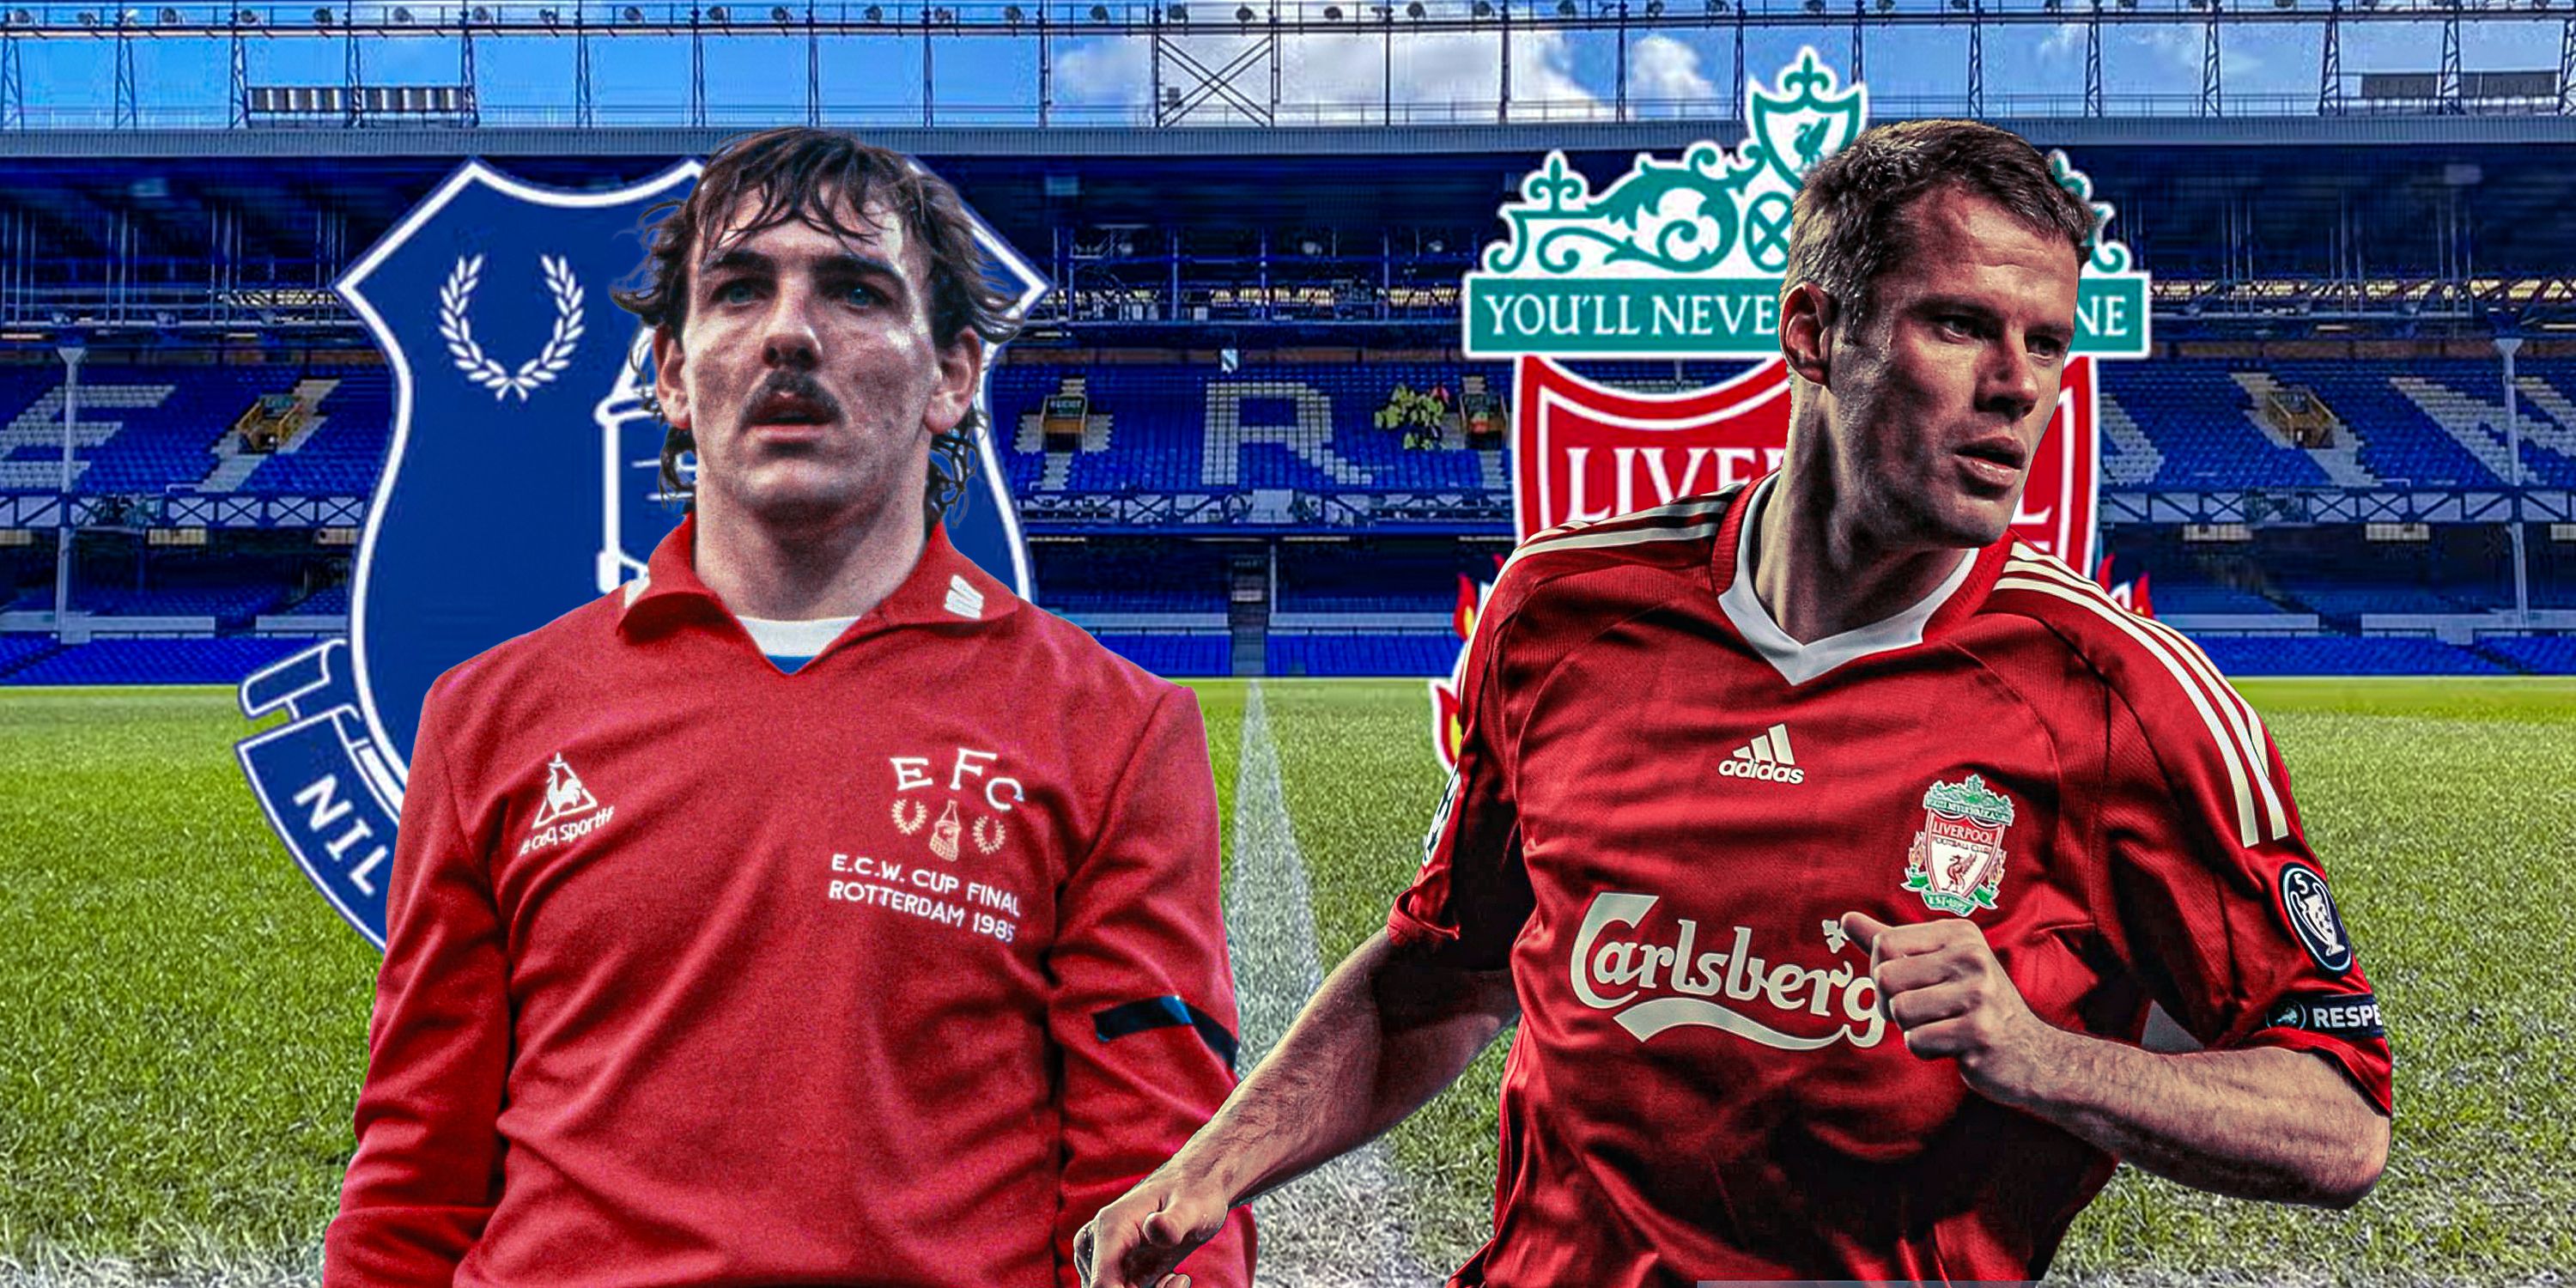 A Goodison Park background featuring Everton's Neville Southall and Liverpool's Jamie Carragher against their respective club badges.